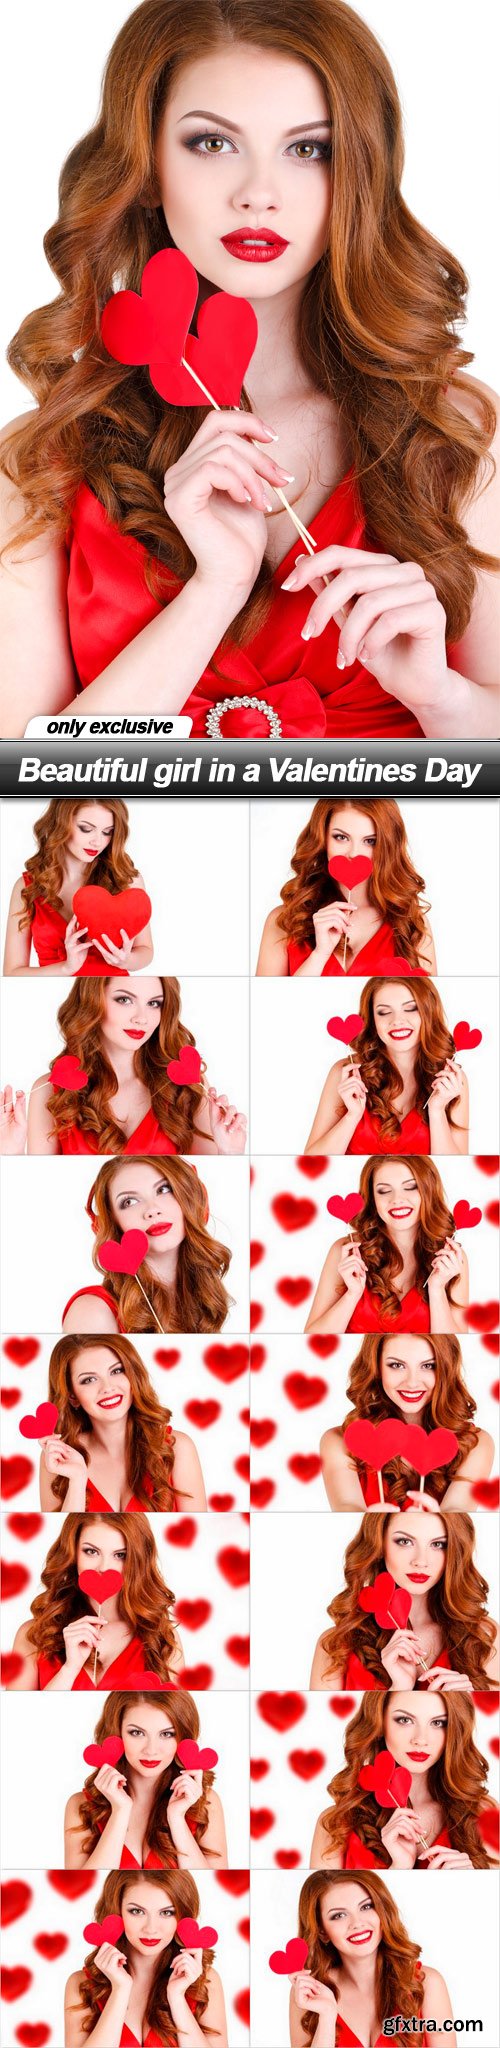 Beautiful girl in a Valentines Day - 15 UHQ JPEG